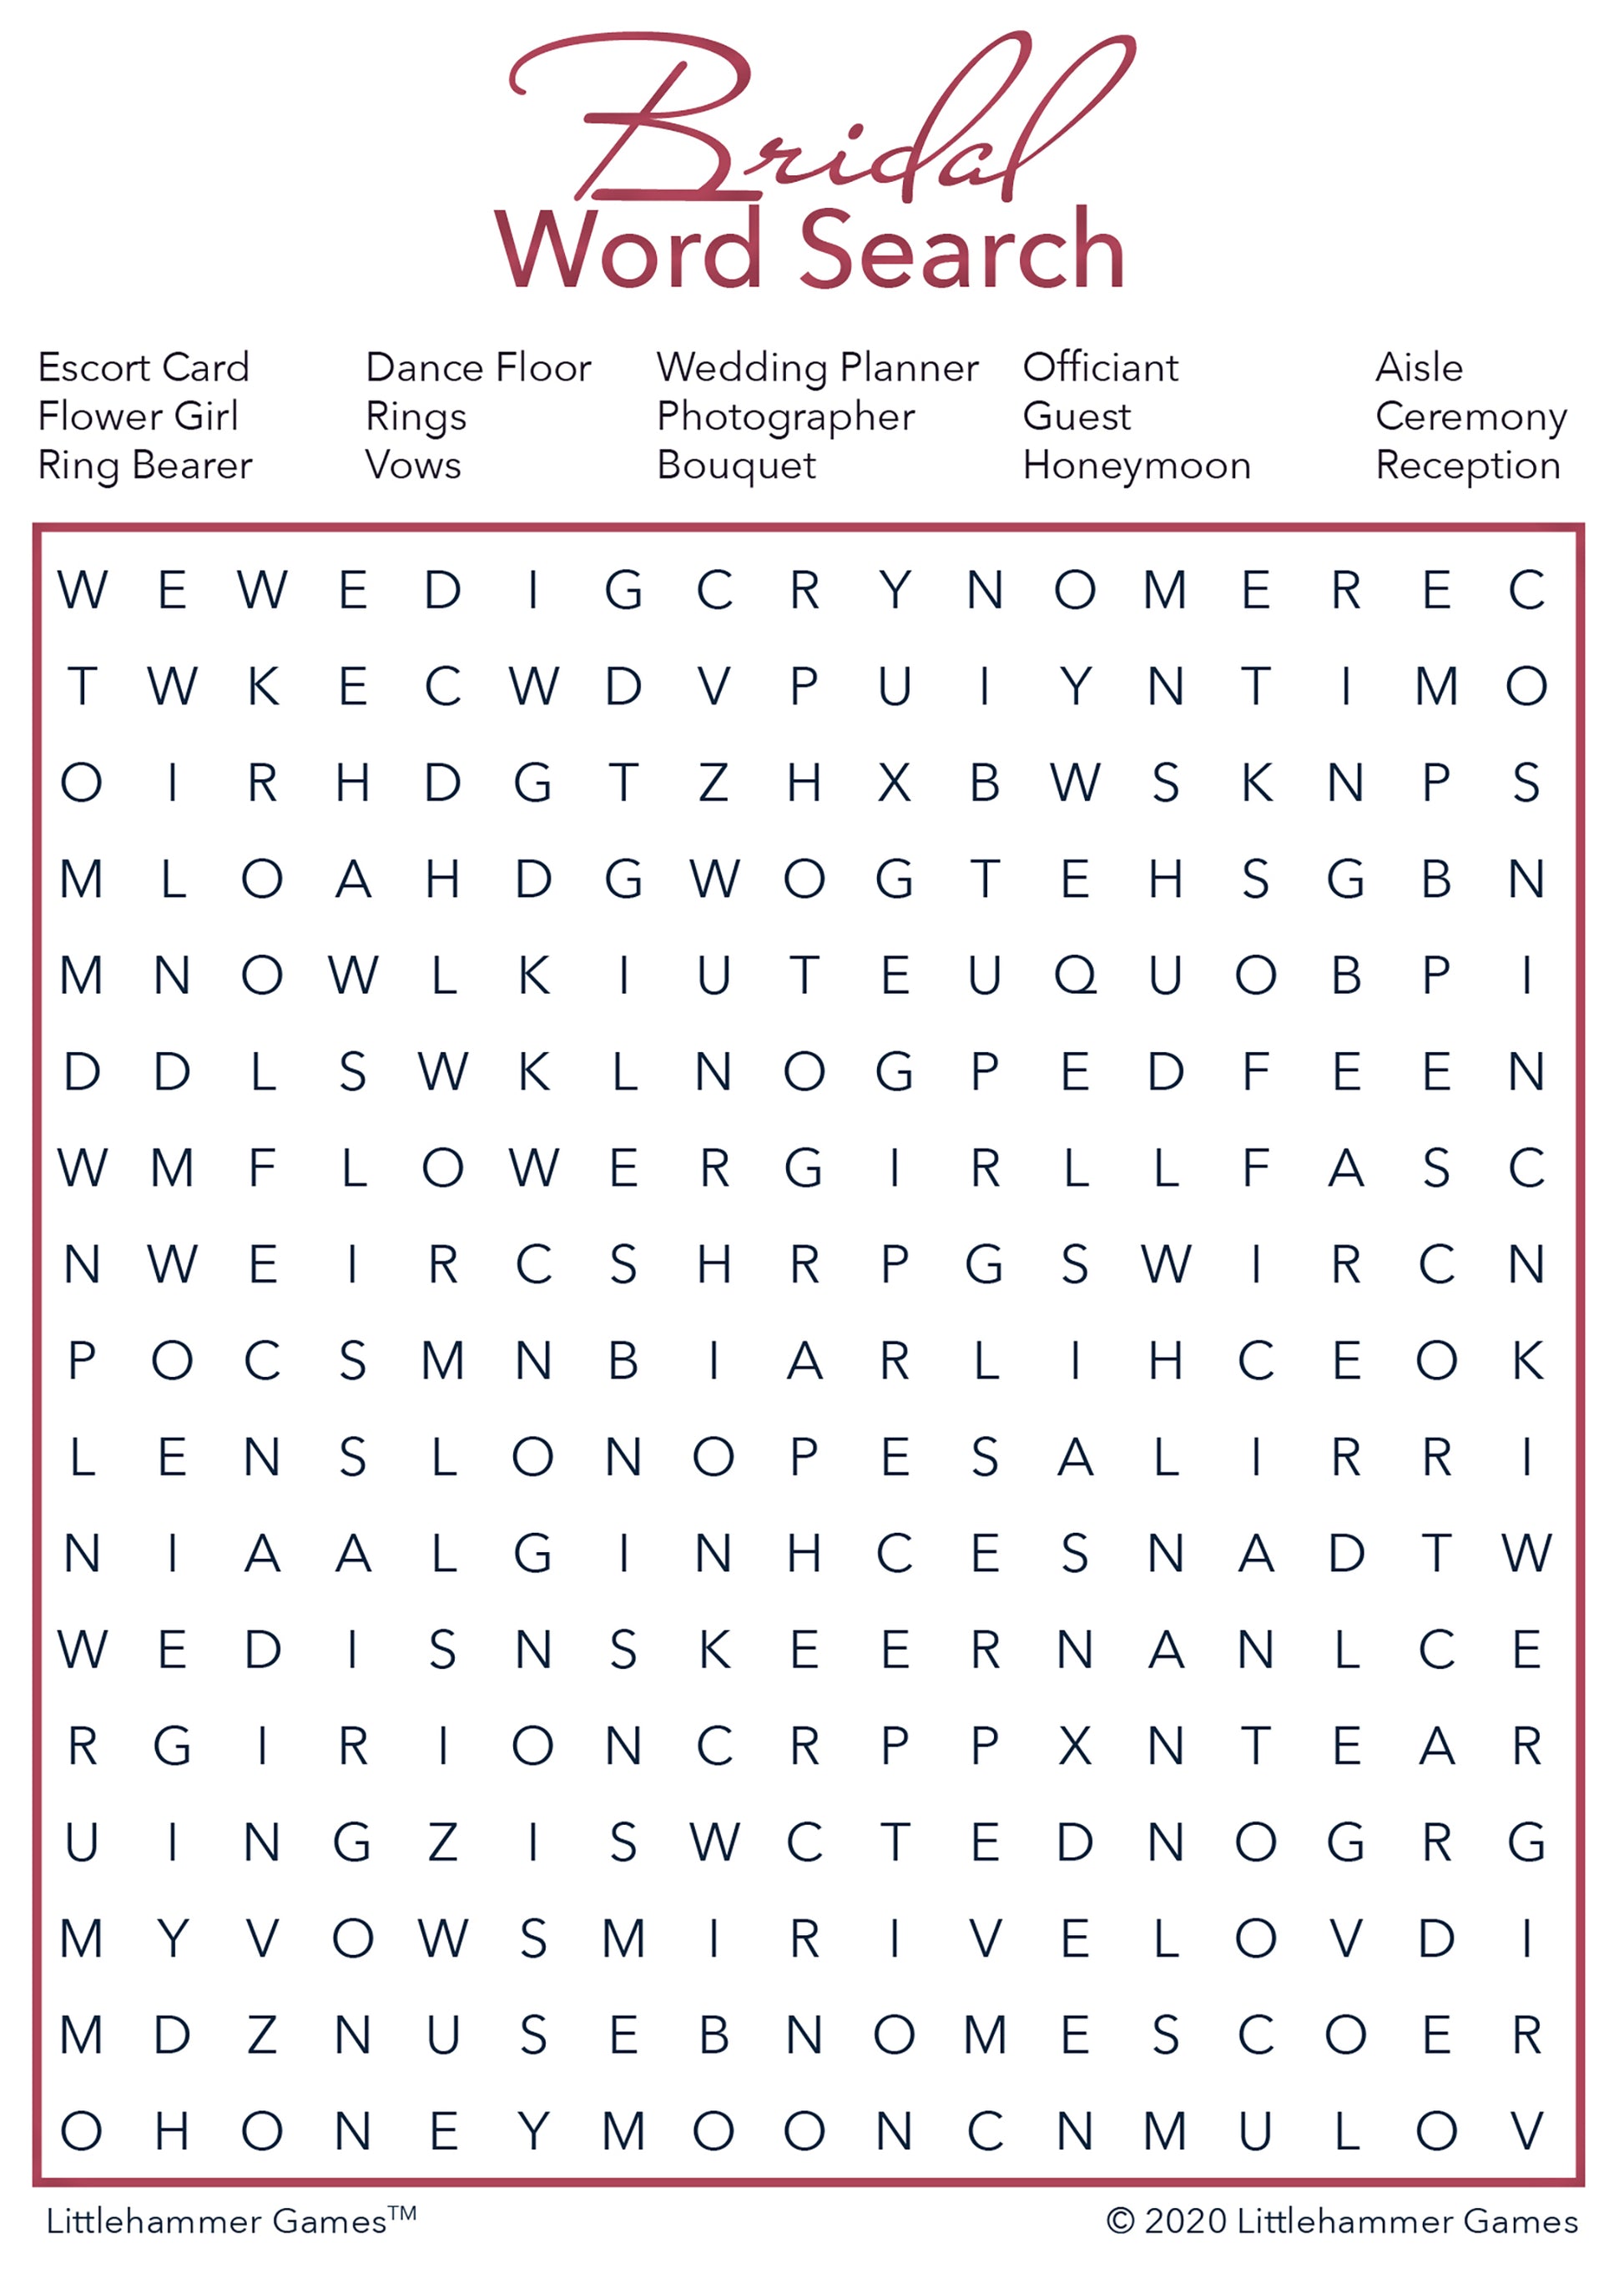 Bridal Word Search game card with a rose gold and white background